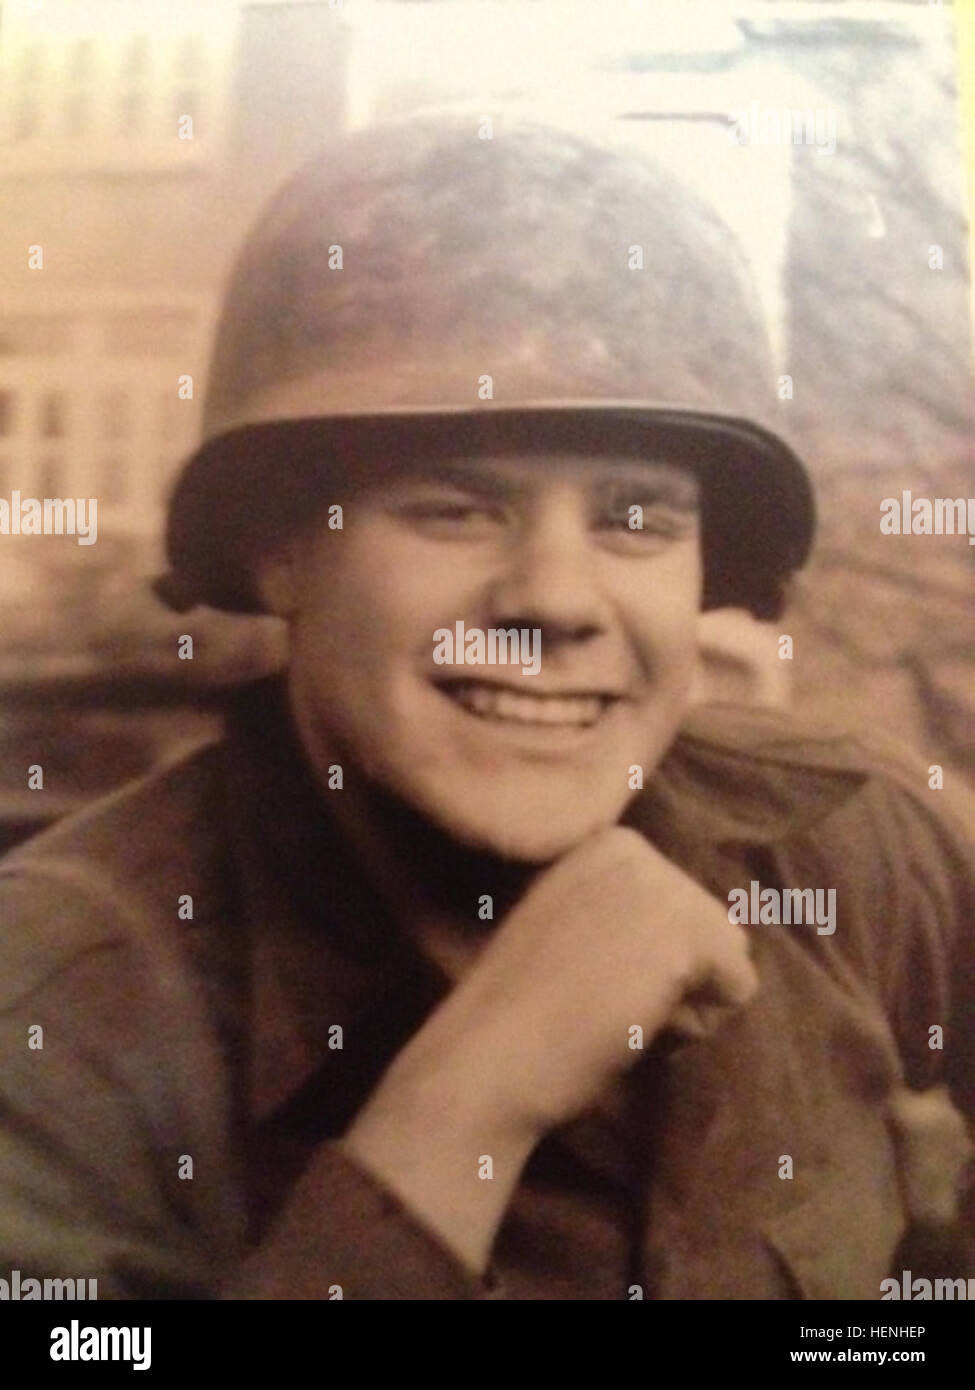 In this undated photo provided by Sgt. Jordan Rabaste of the 1st Squadron (Airborne), 40th Cavalry, Rabaste's grandfather, Pfc. Robert Grant, poses for a photo somewhere in Europe during World War II. Grant came ashore at Omaha Beach on D+3 and fought with the 28th Infantry Division throughout Europe, receiving the Bronze Star Medal and Purple Heart for his actions during the Battle of the Bulge. Spartans return from Normandy 140529-A-GR997-272 Stock Photo